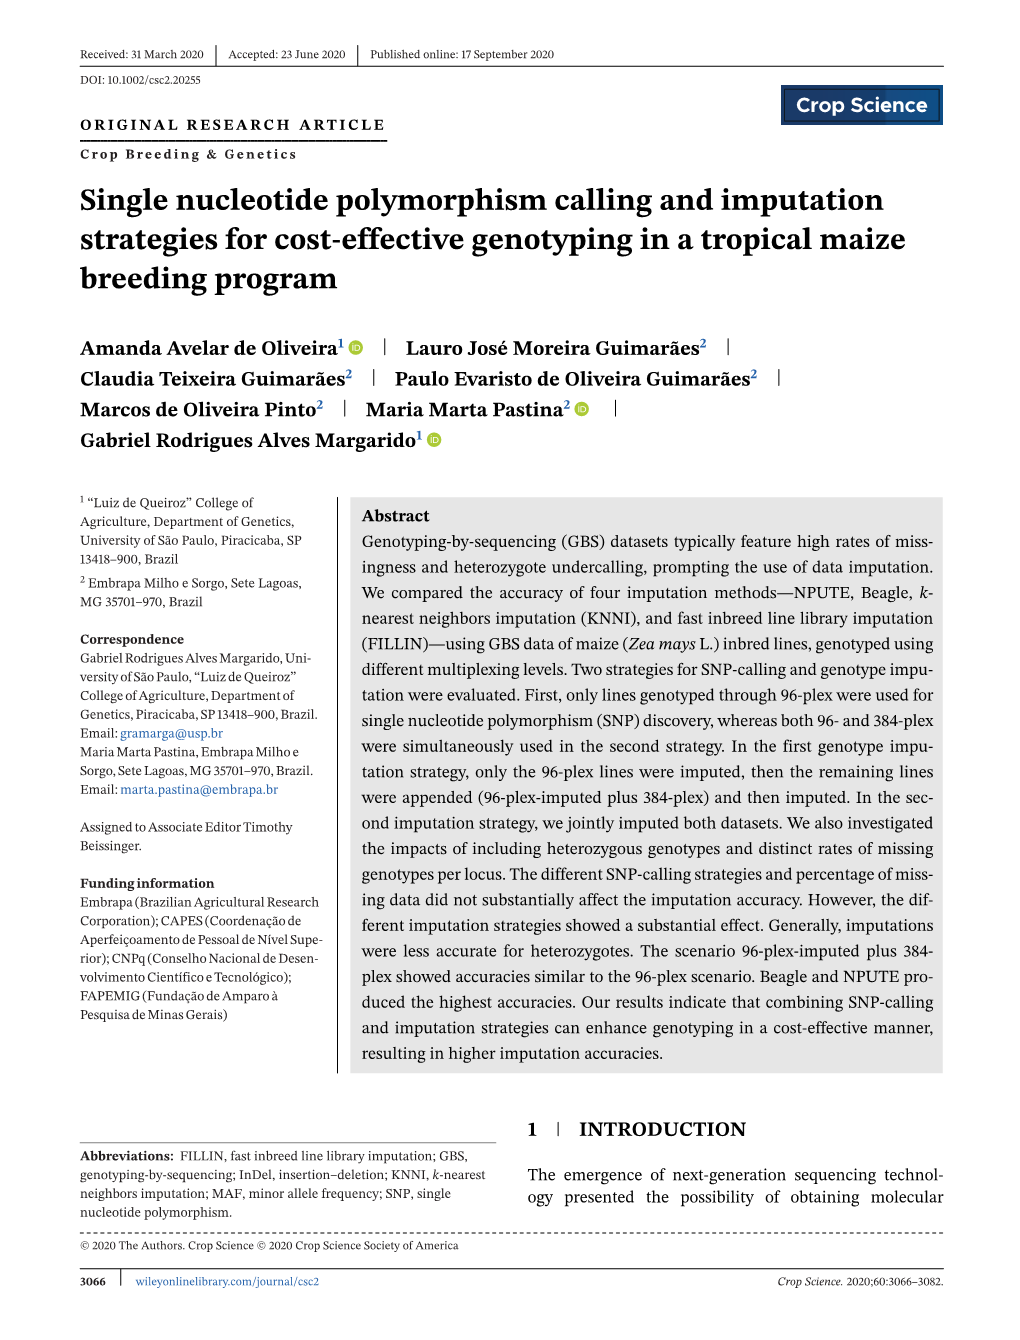 Single Nucleotide Polymorphism Calling and Imputation Strategies for Cost-Effective Genotyping in a Tropical Maize Breeding Program